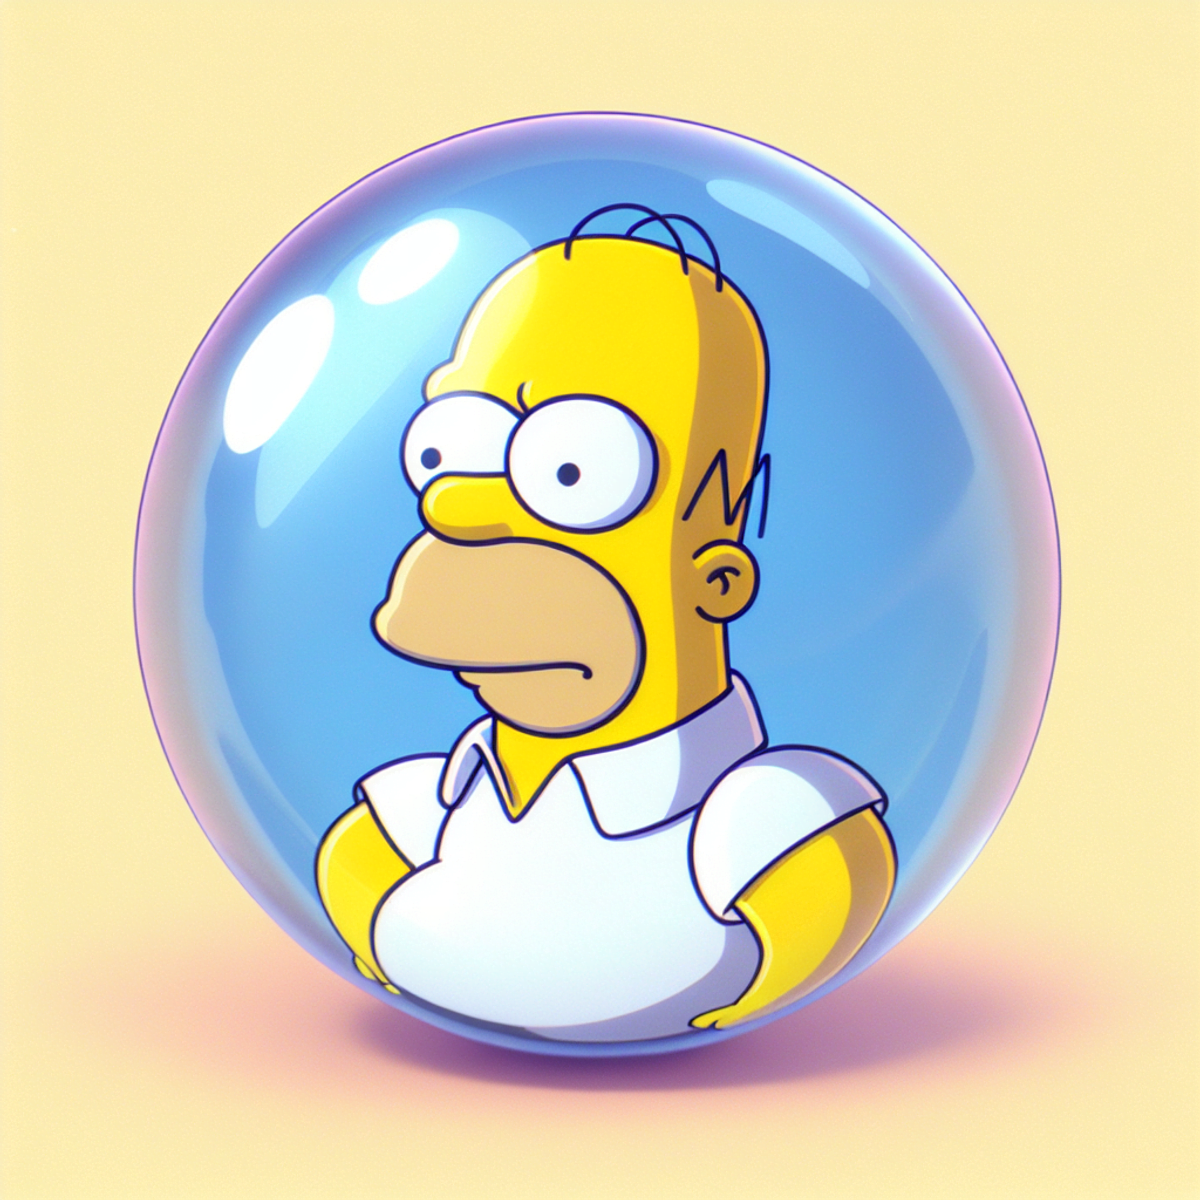 Cartoon character with yellow skin, bald head, and white shirt reflected in a crystal ball.